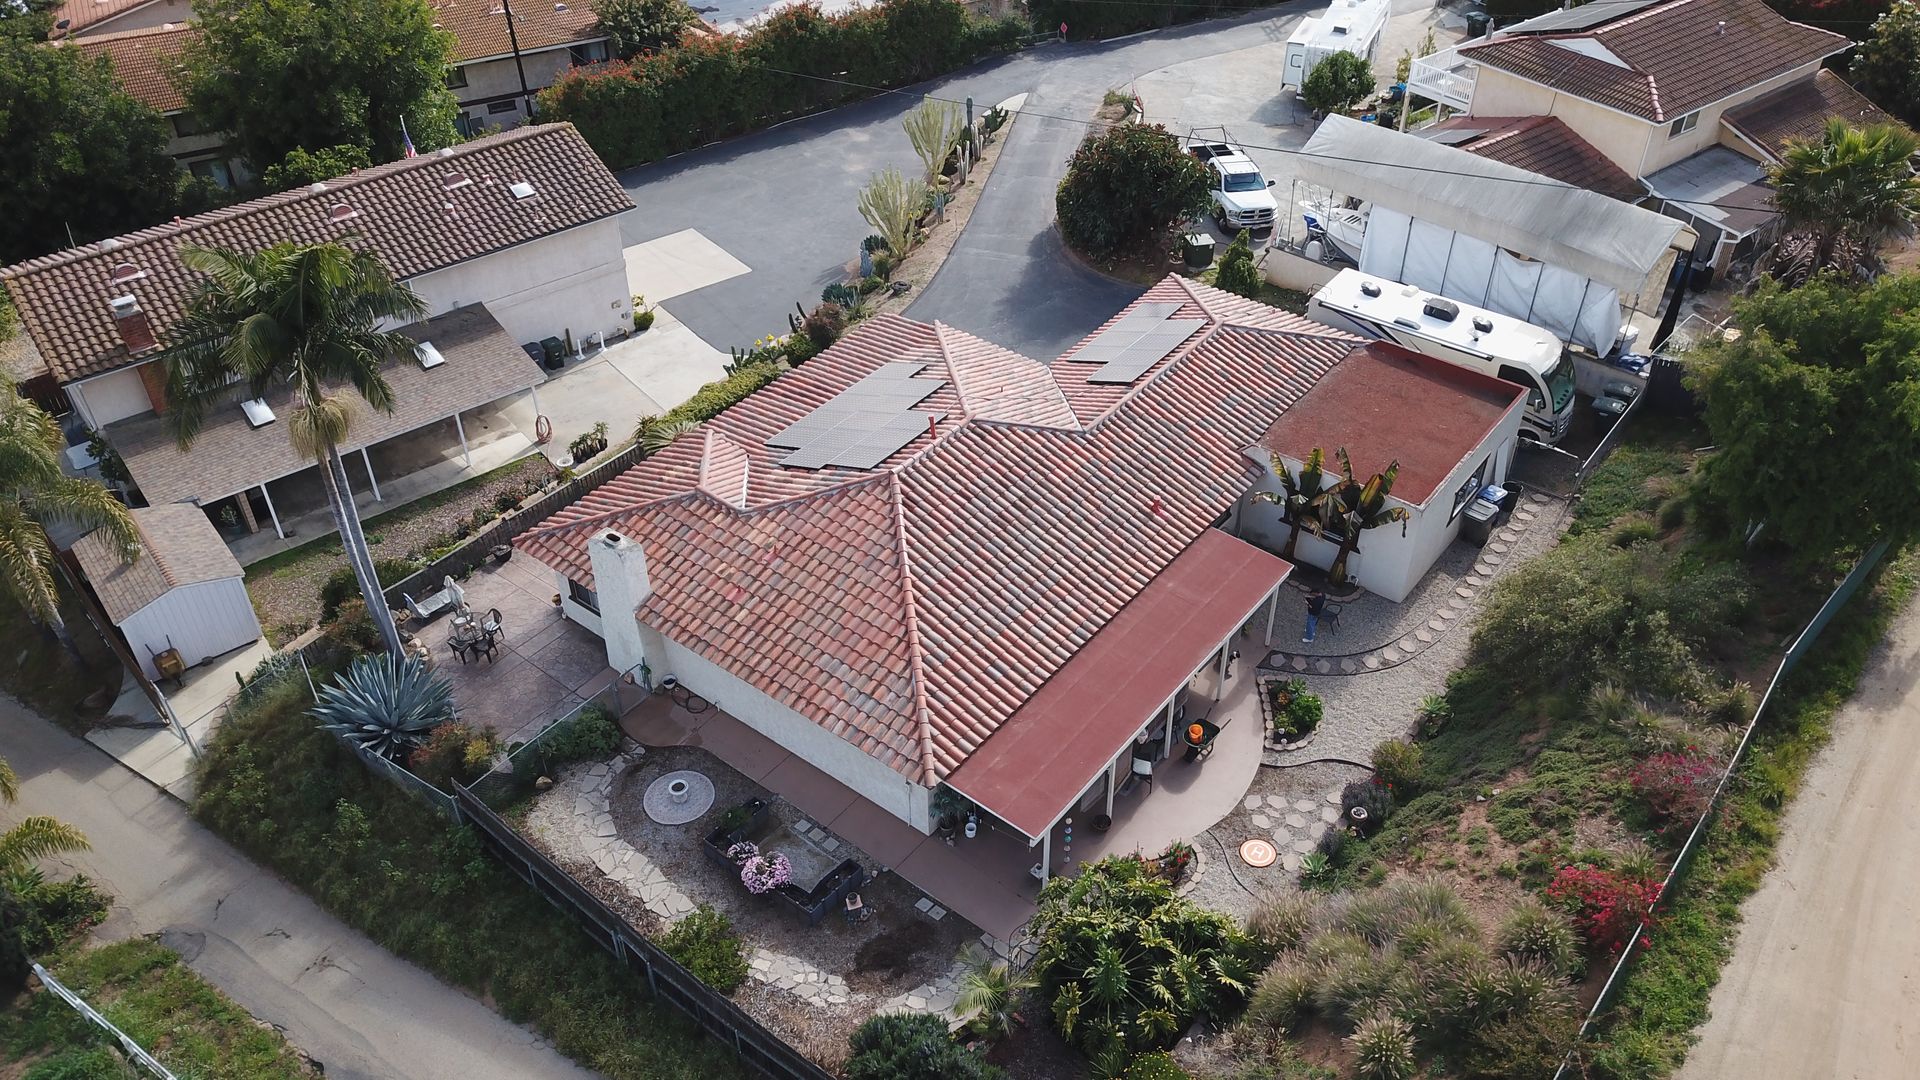 Roof-King-Solar-Integration-On-Tile-Roof-Aerial-View